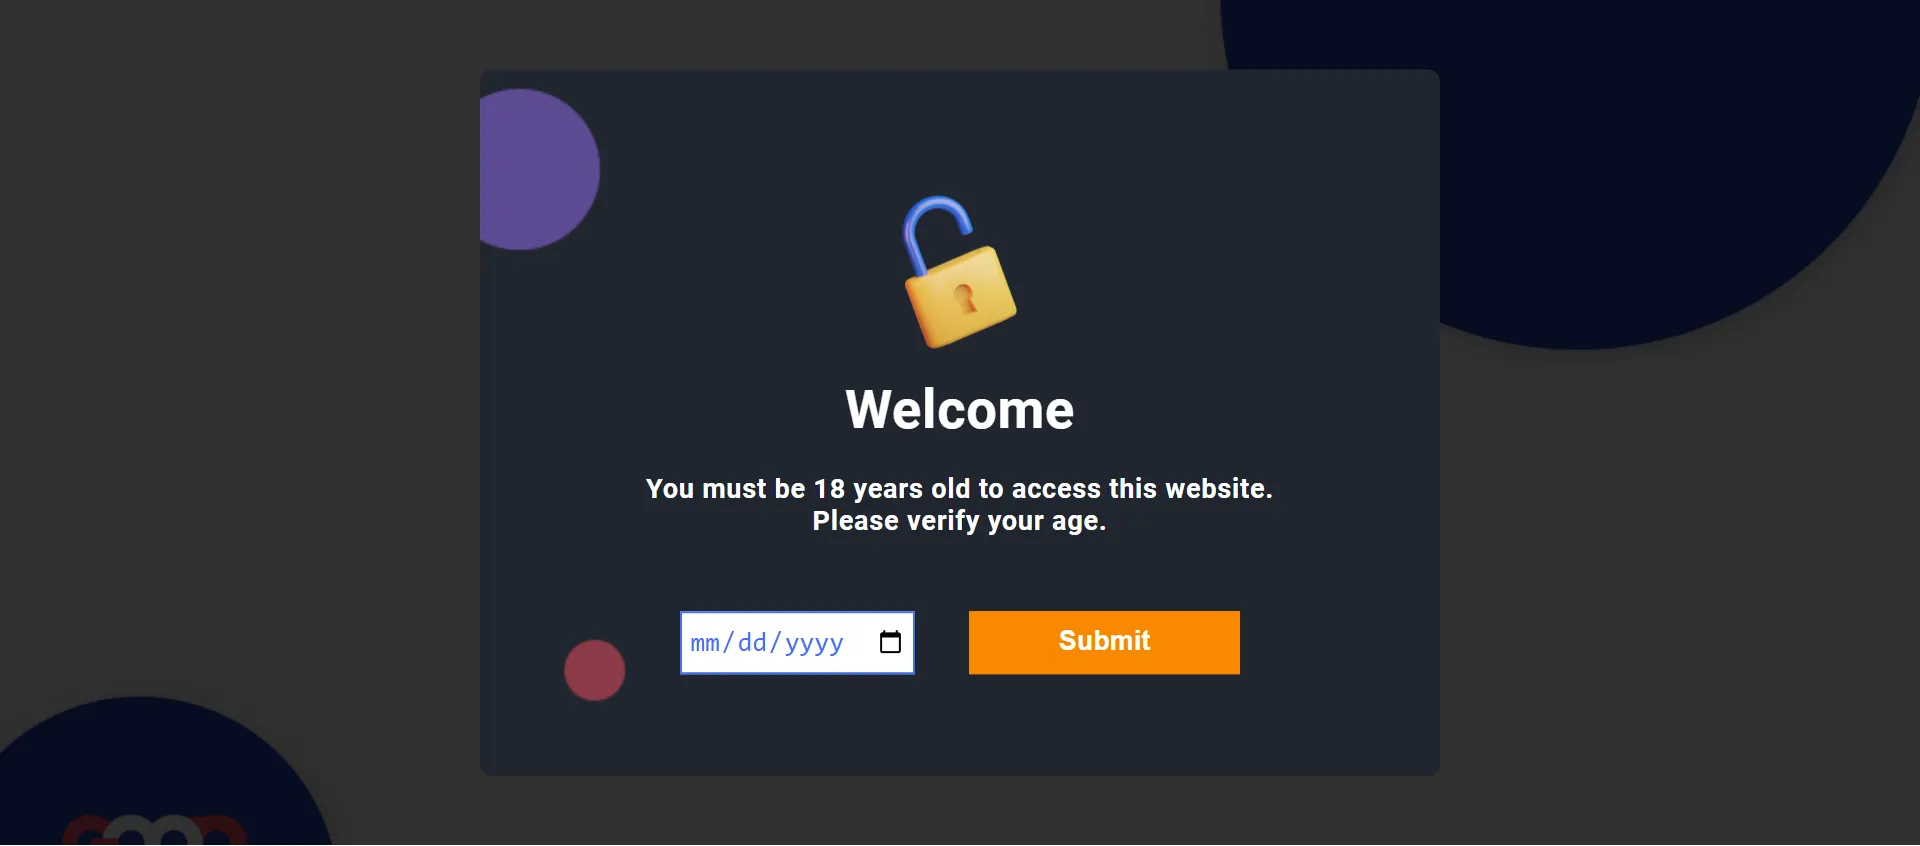 Demo of age verification on Shopify